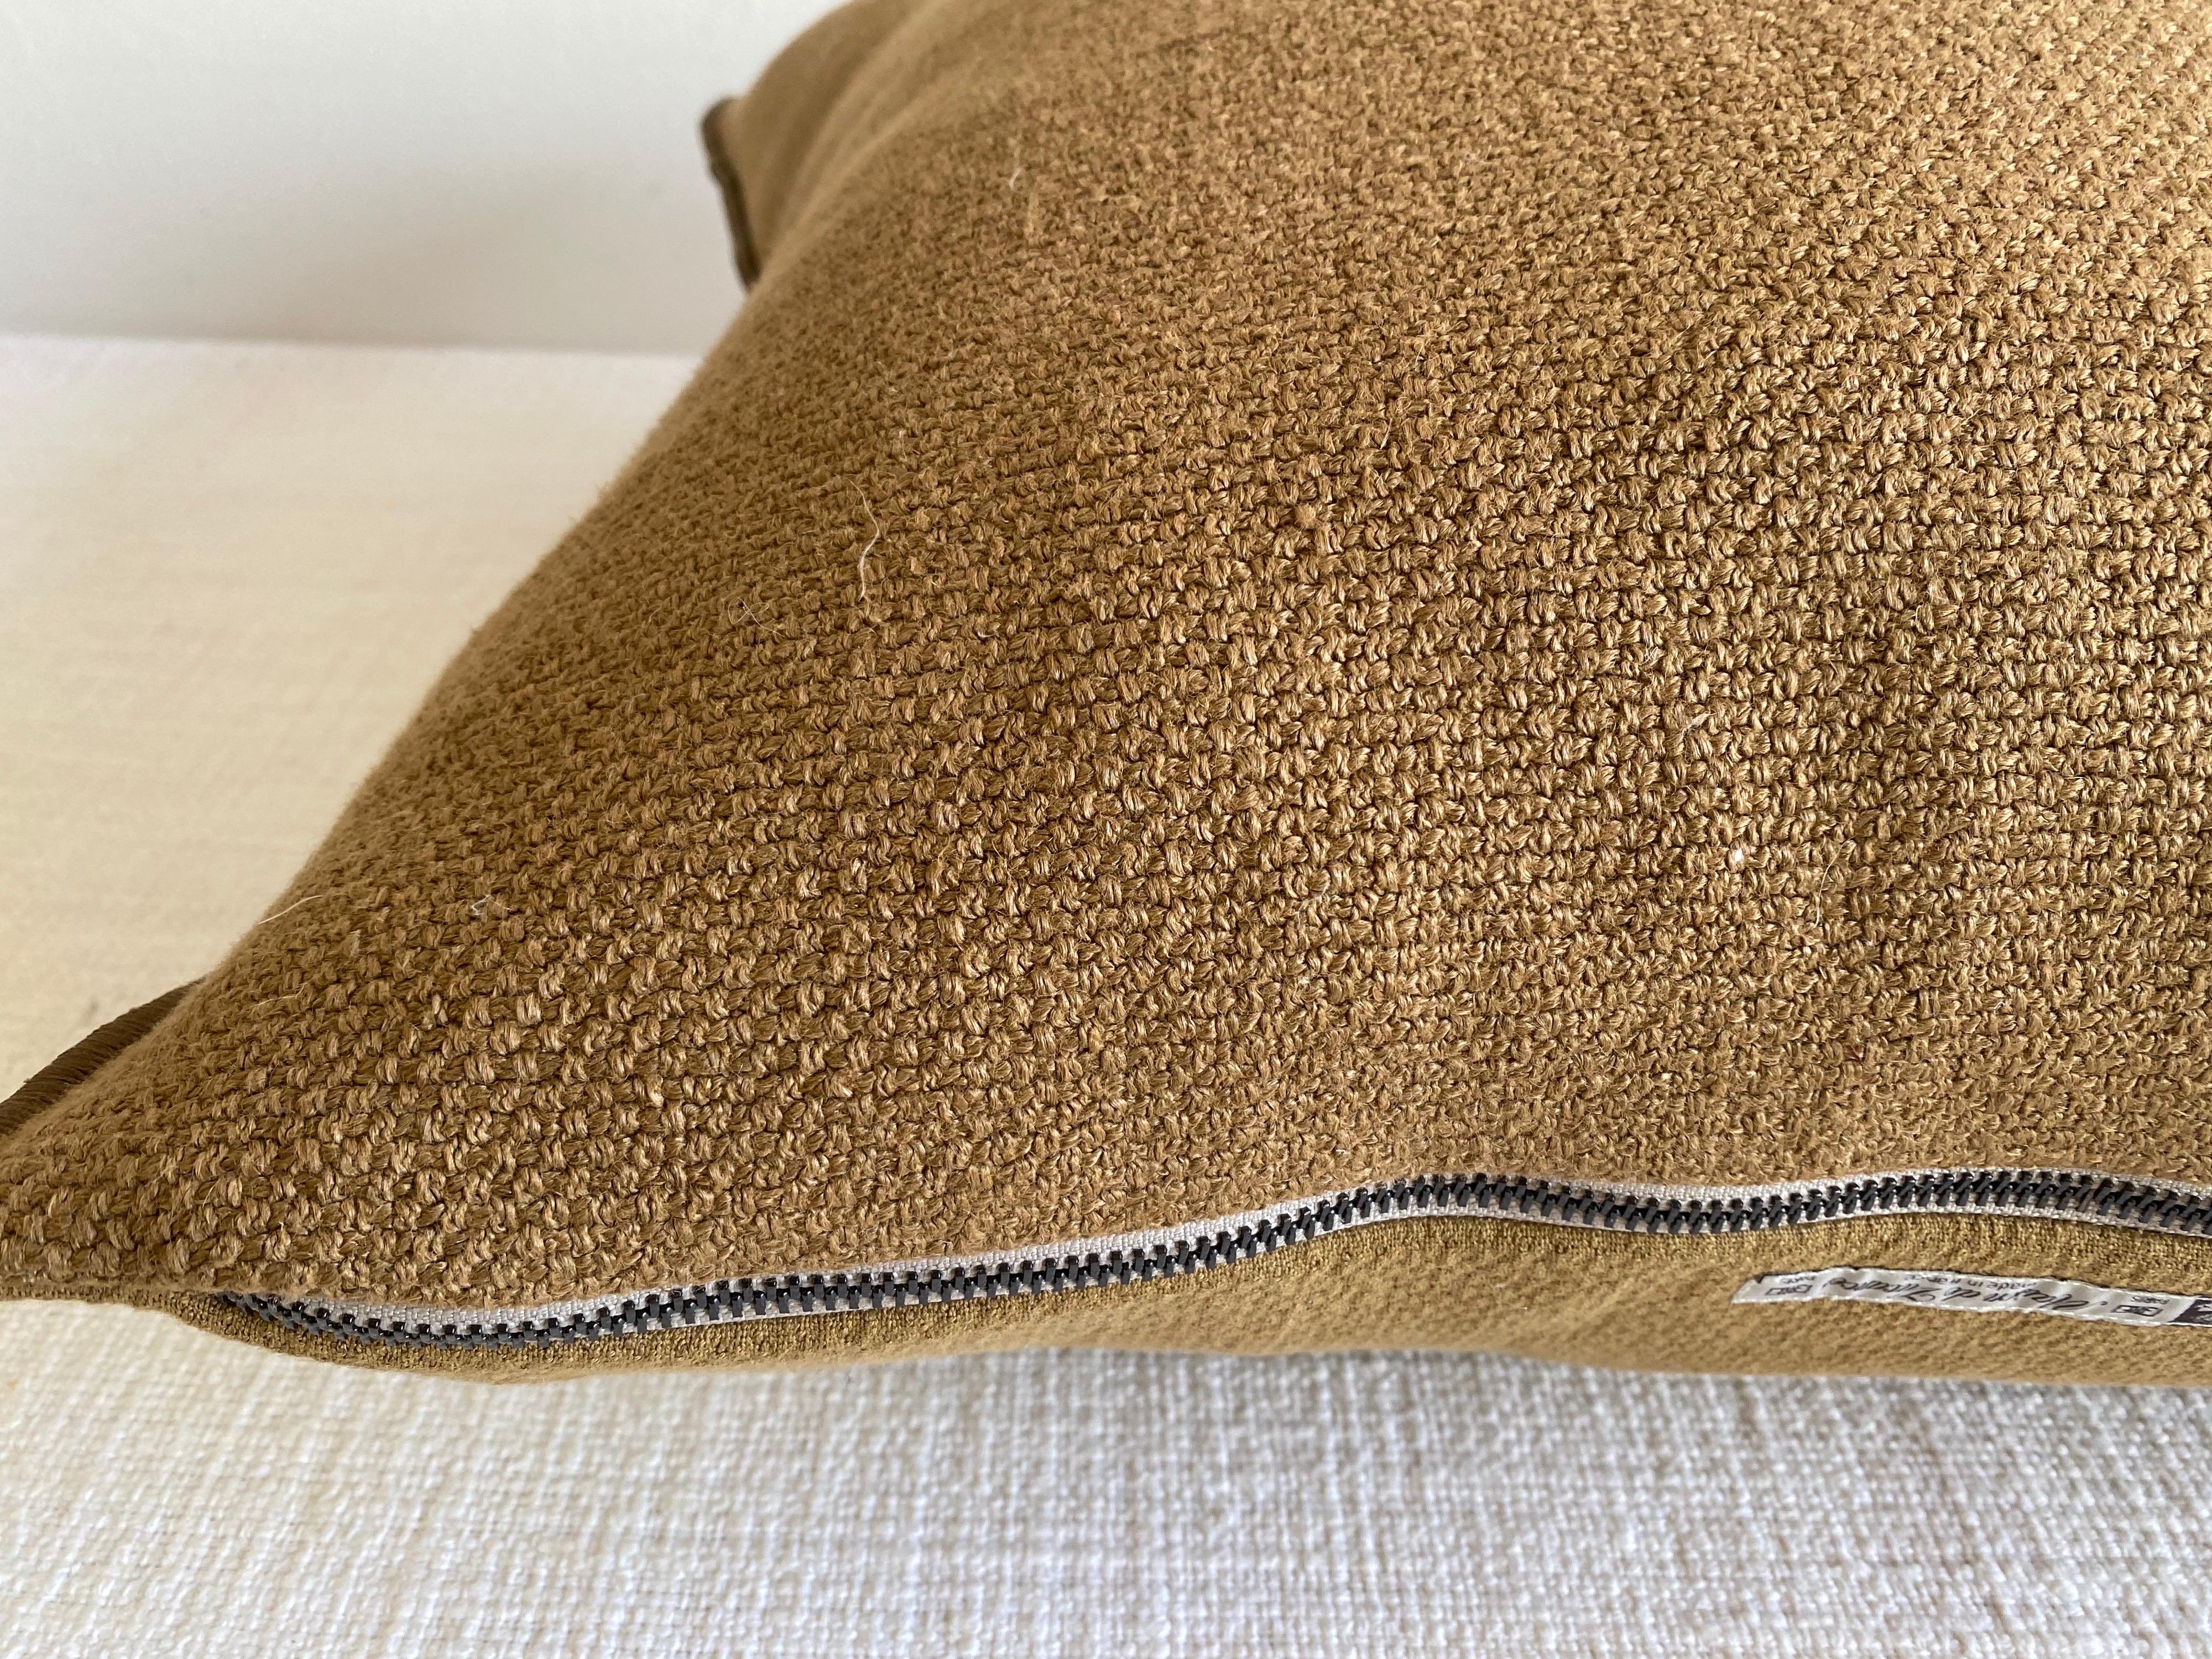 Cotton Fromentera French Linen Accent Pillow in Cappucino For Sale